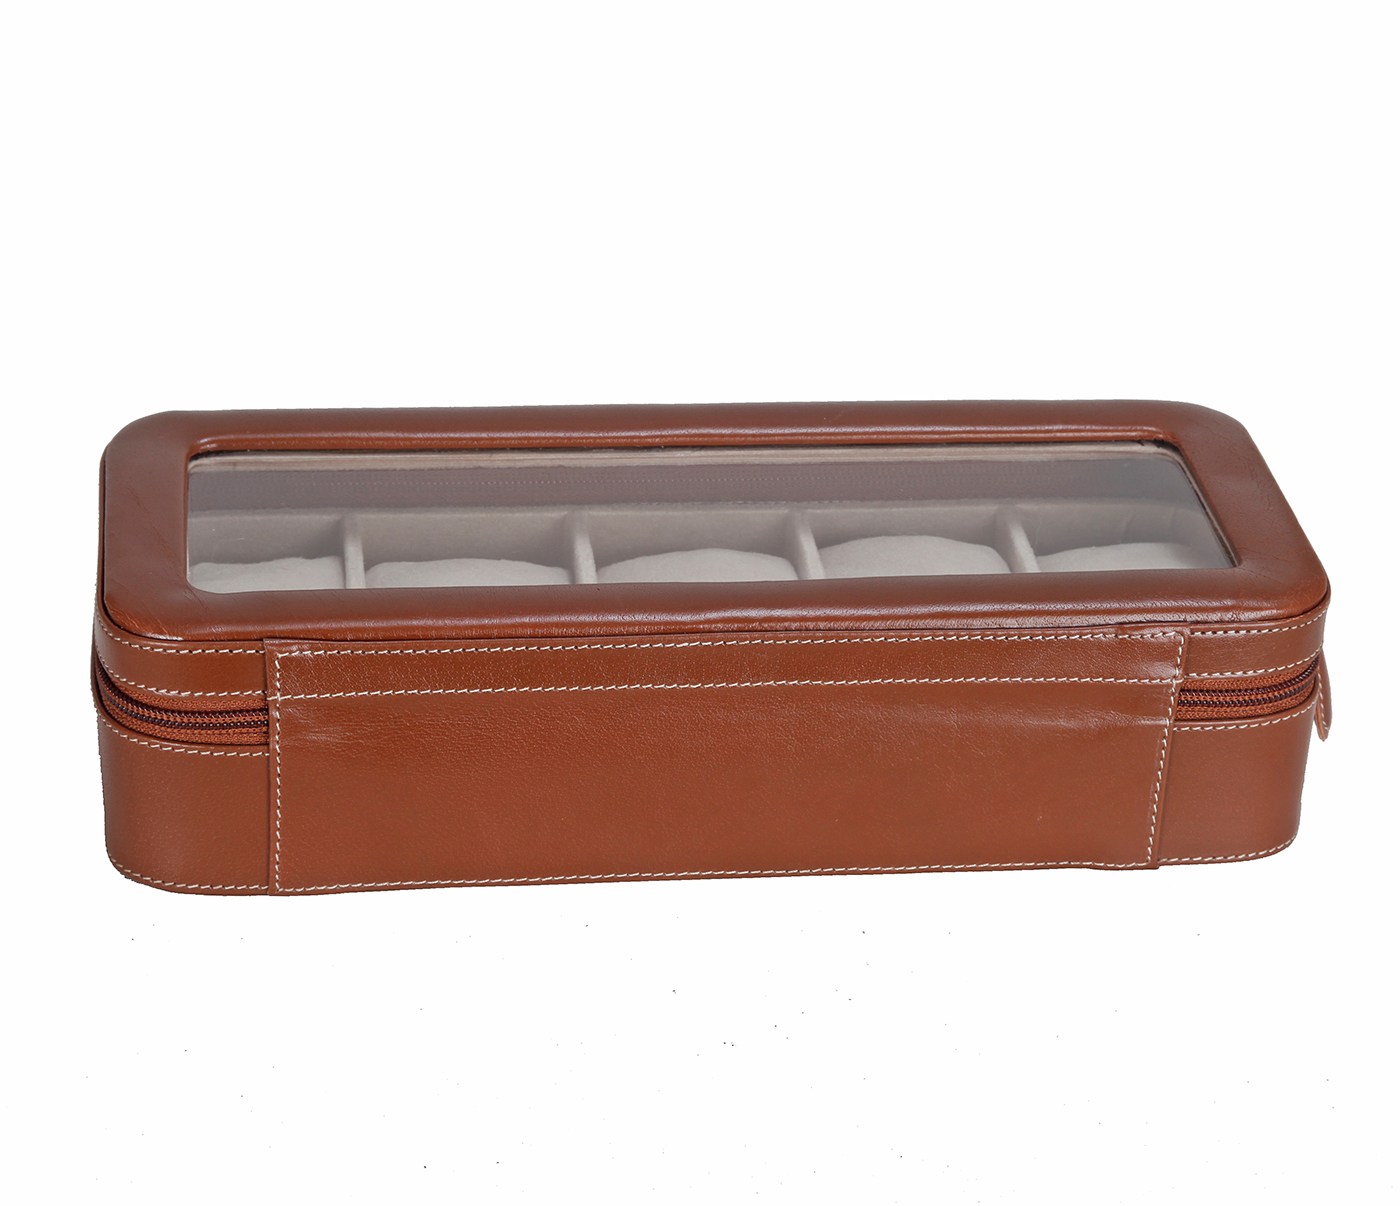 W277--Watch case to hold 5 watches in Genuine Leather - Tan